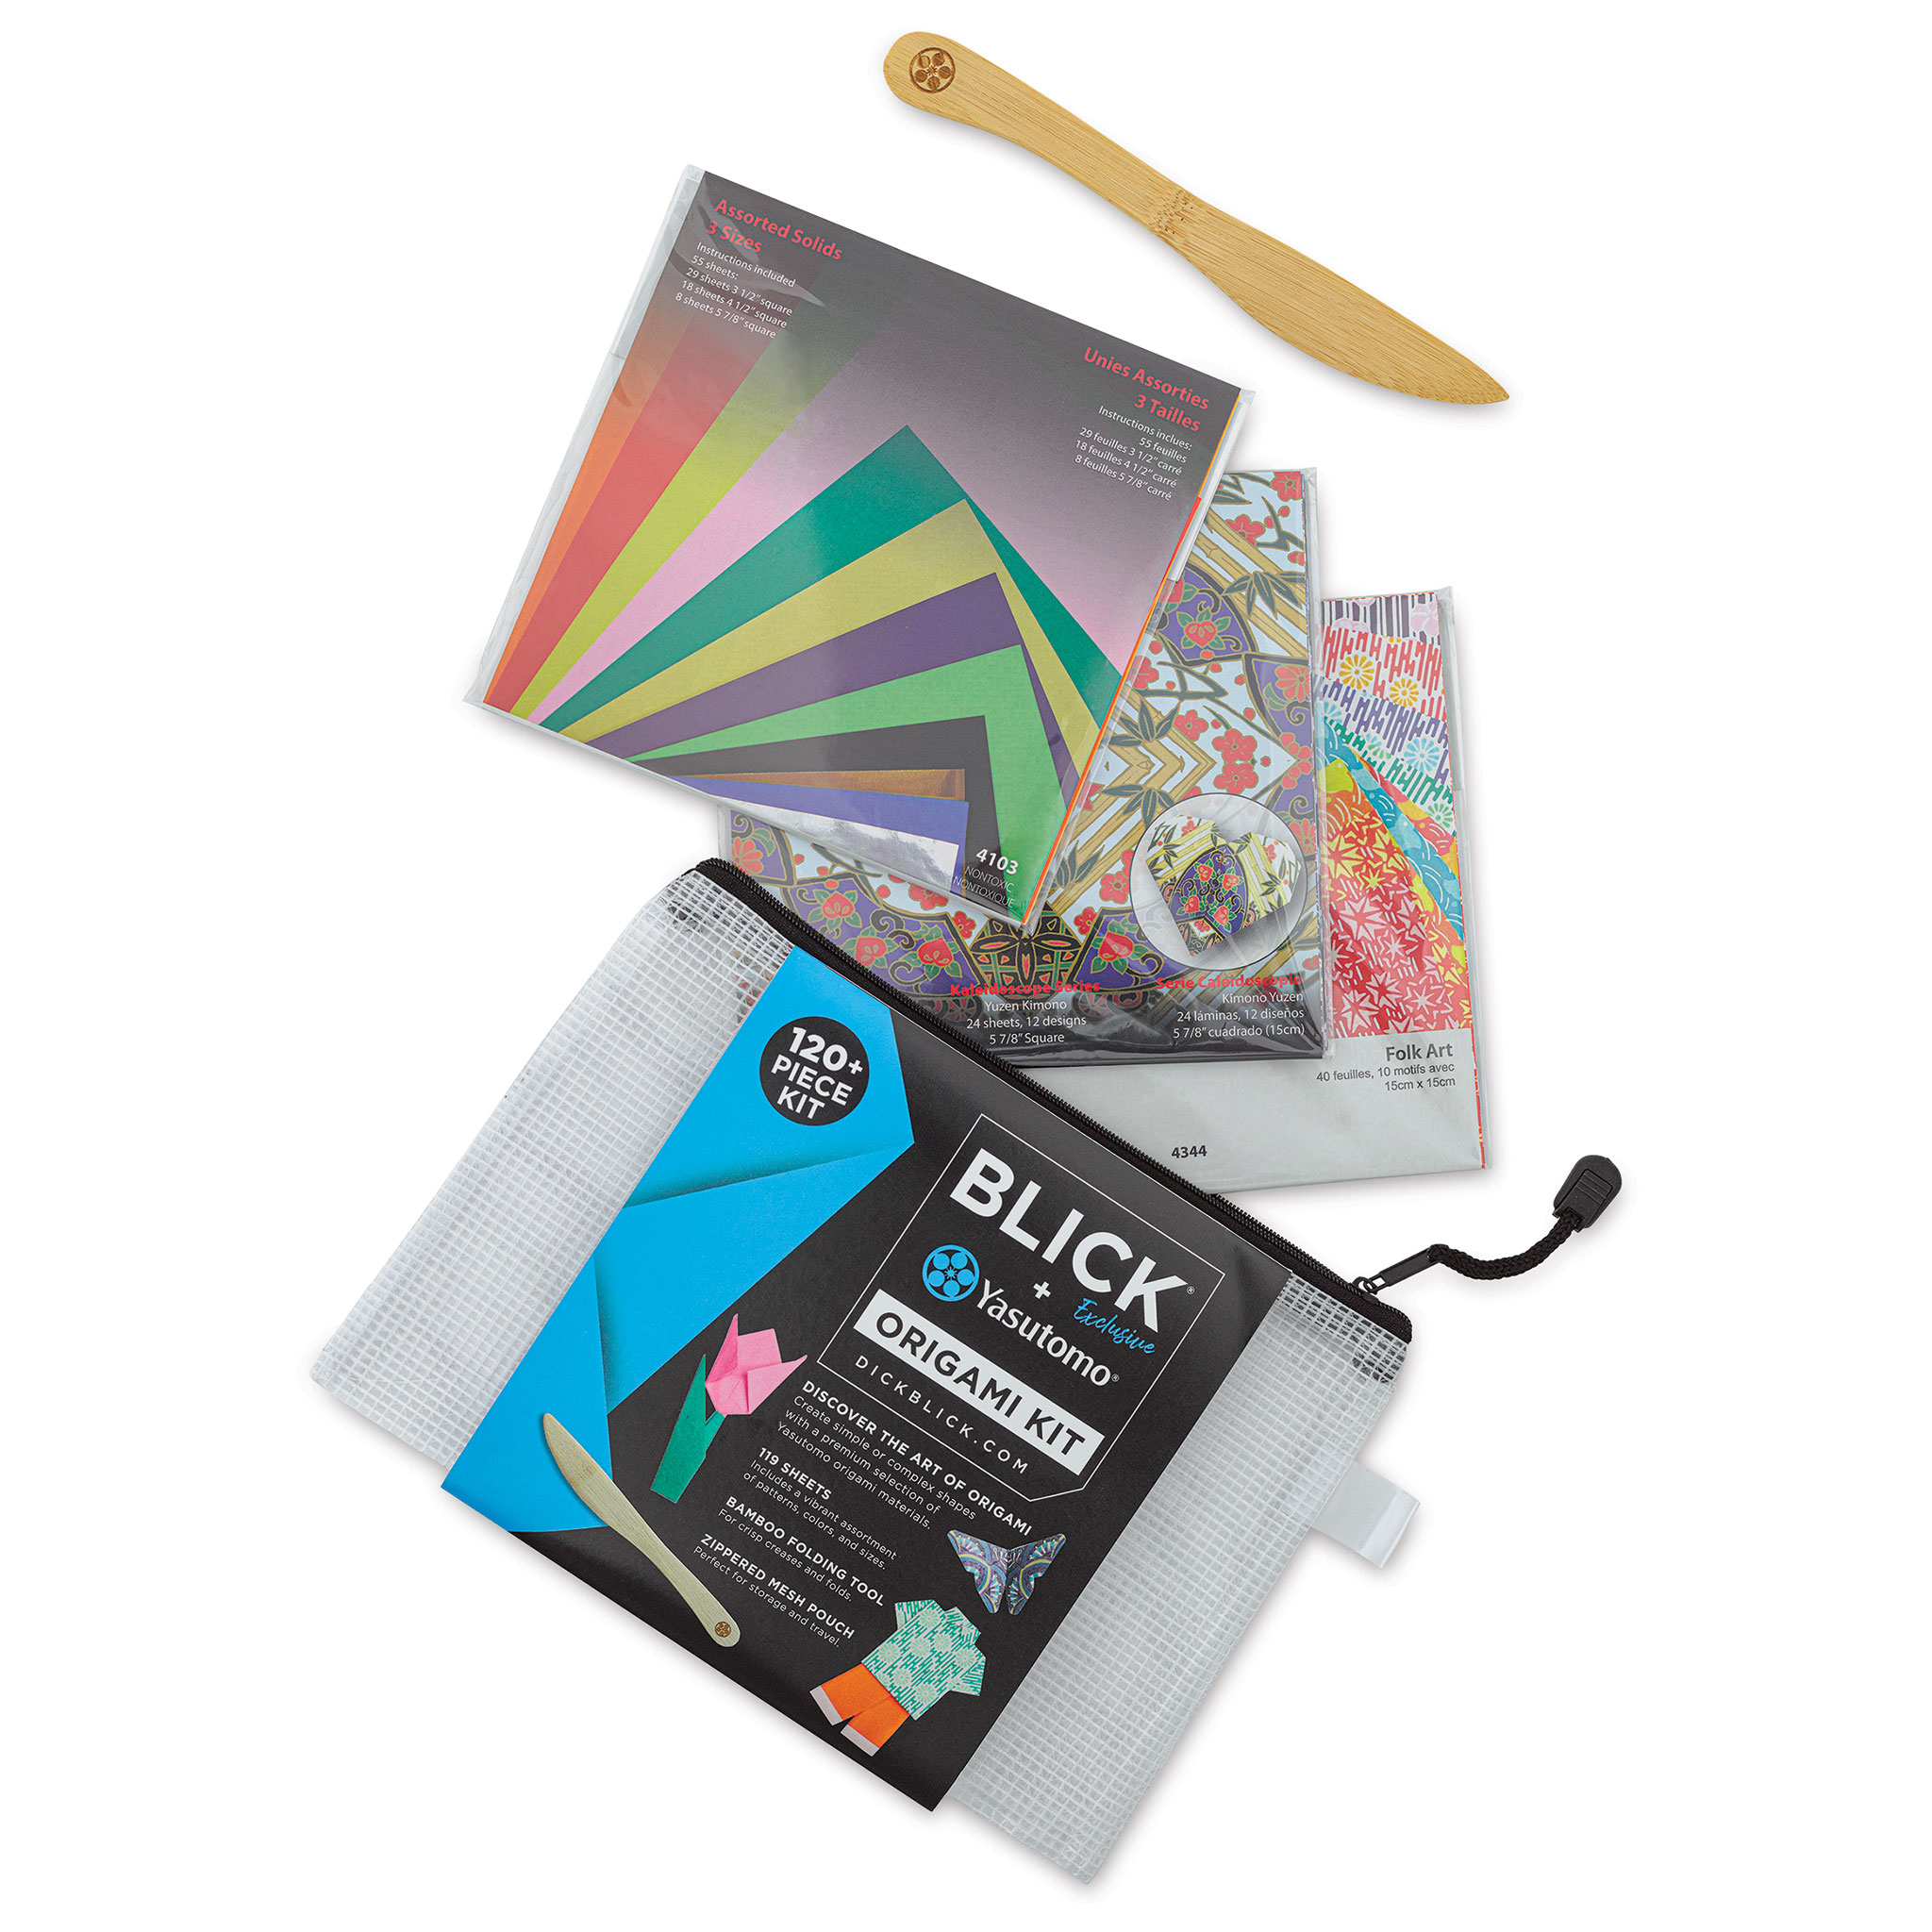 Hygloss Metallic Foil Paper 10 x 13 Inch, 50 Sheets, 10 x 13, 5 Assorted  Colors